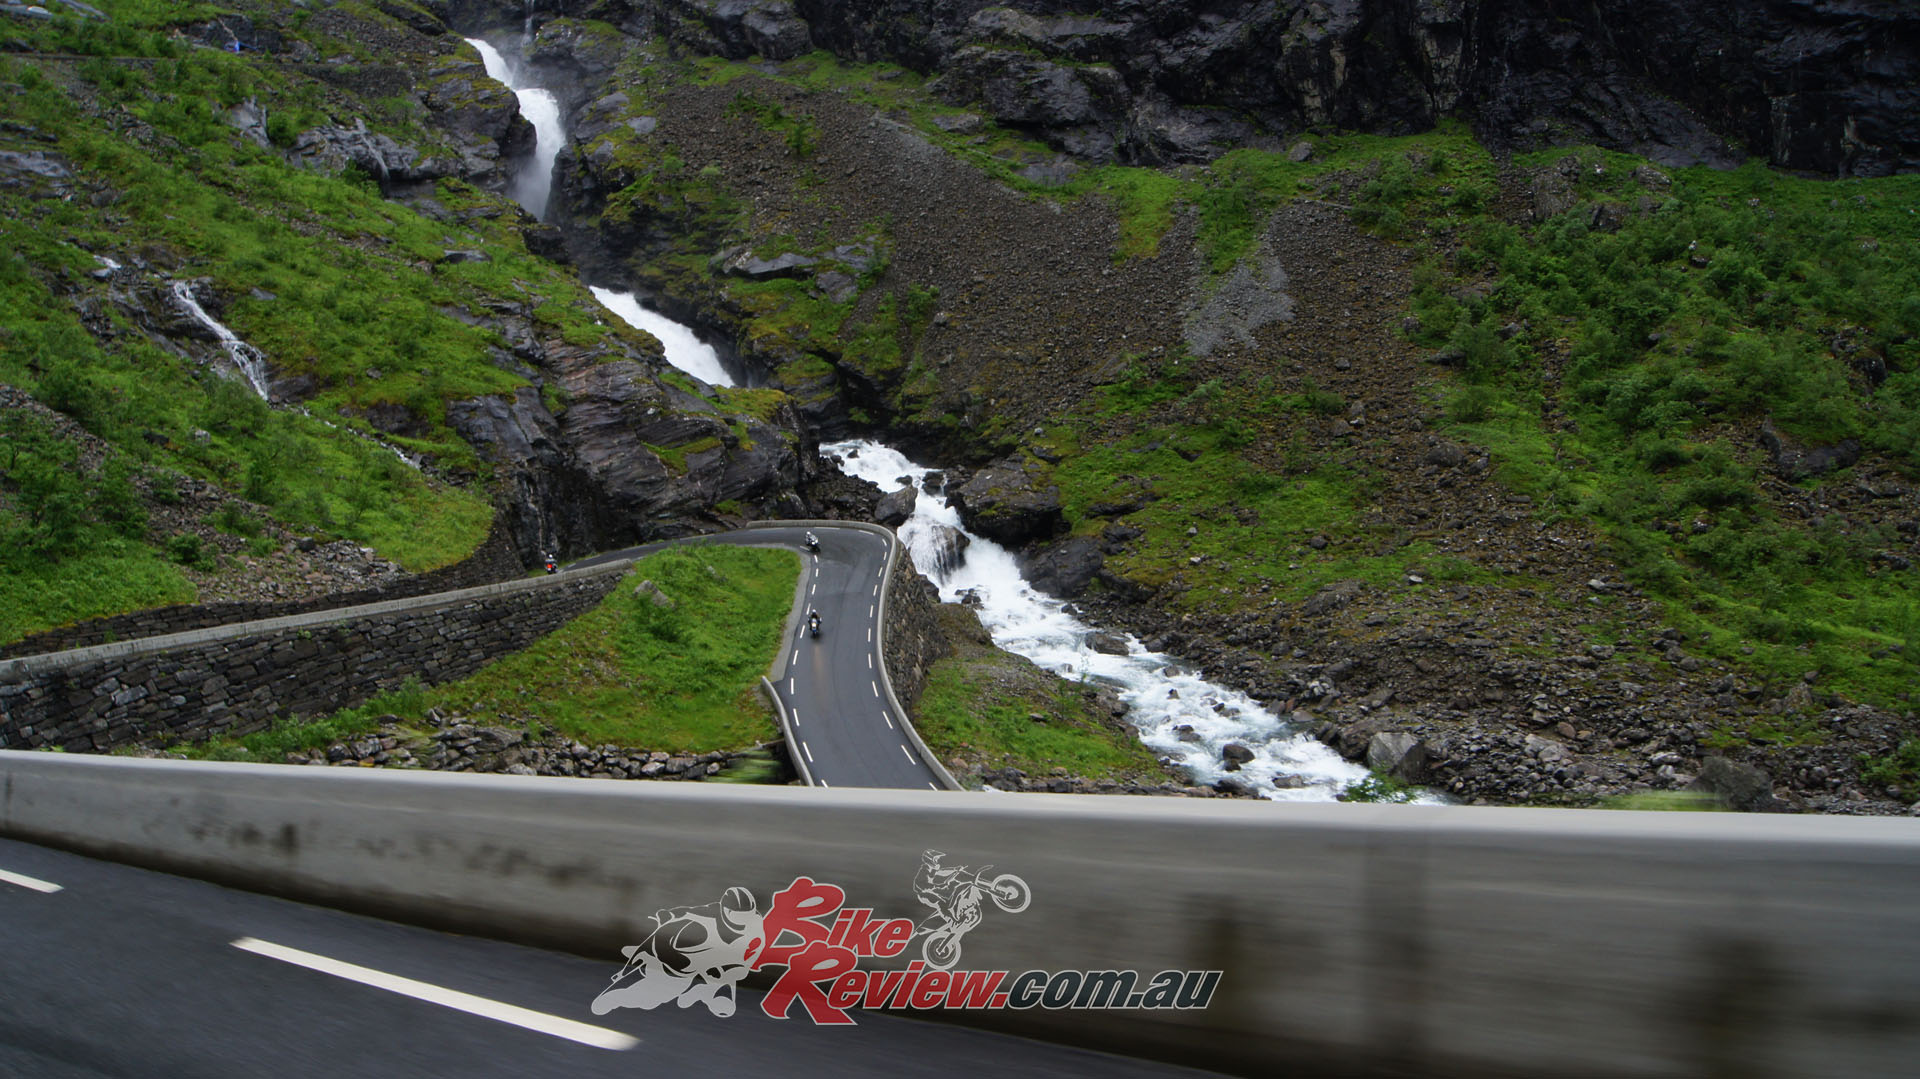 There is no beating Trollstigen for motorcycling enjoyment. Try to get there when traffic is light.